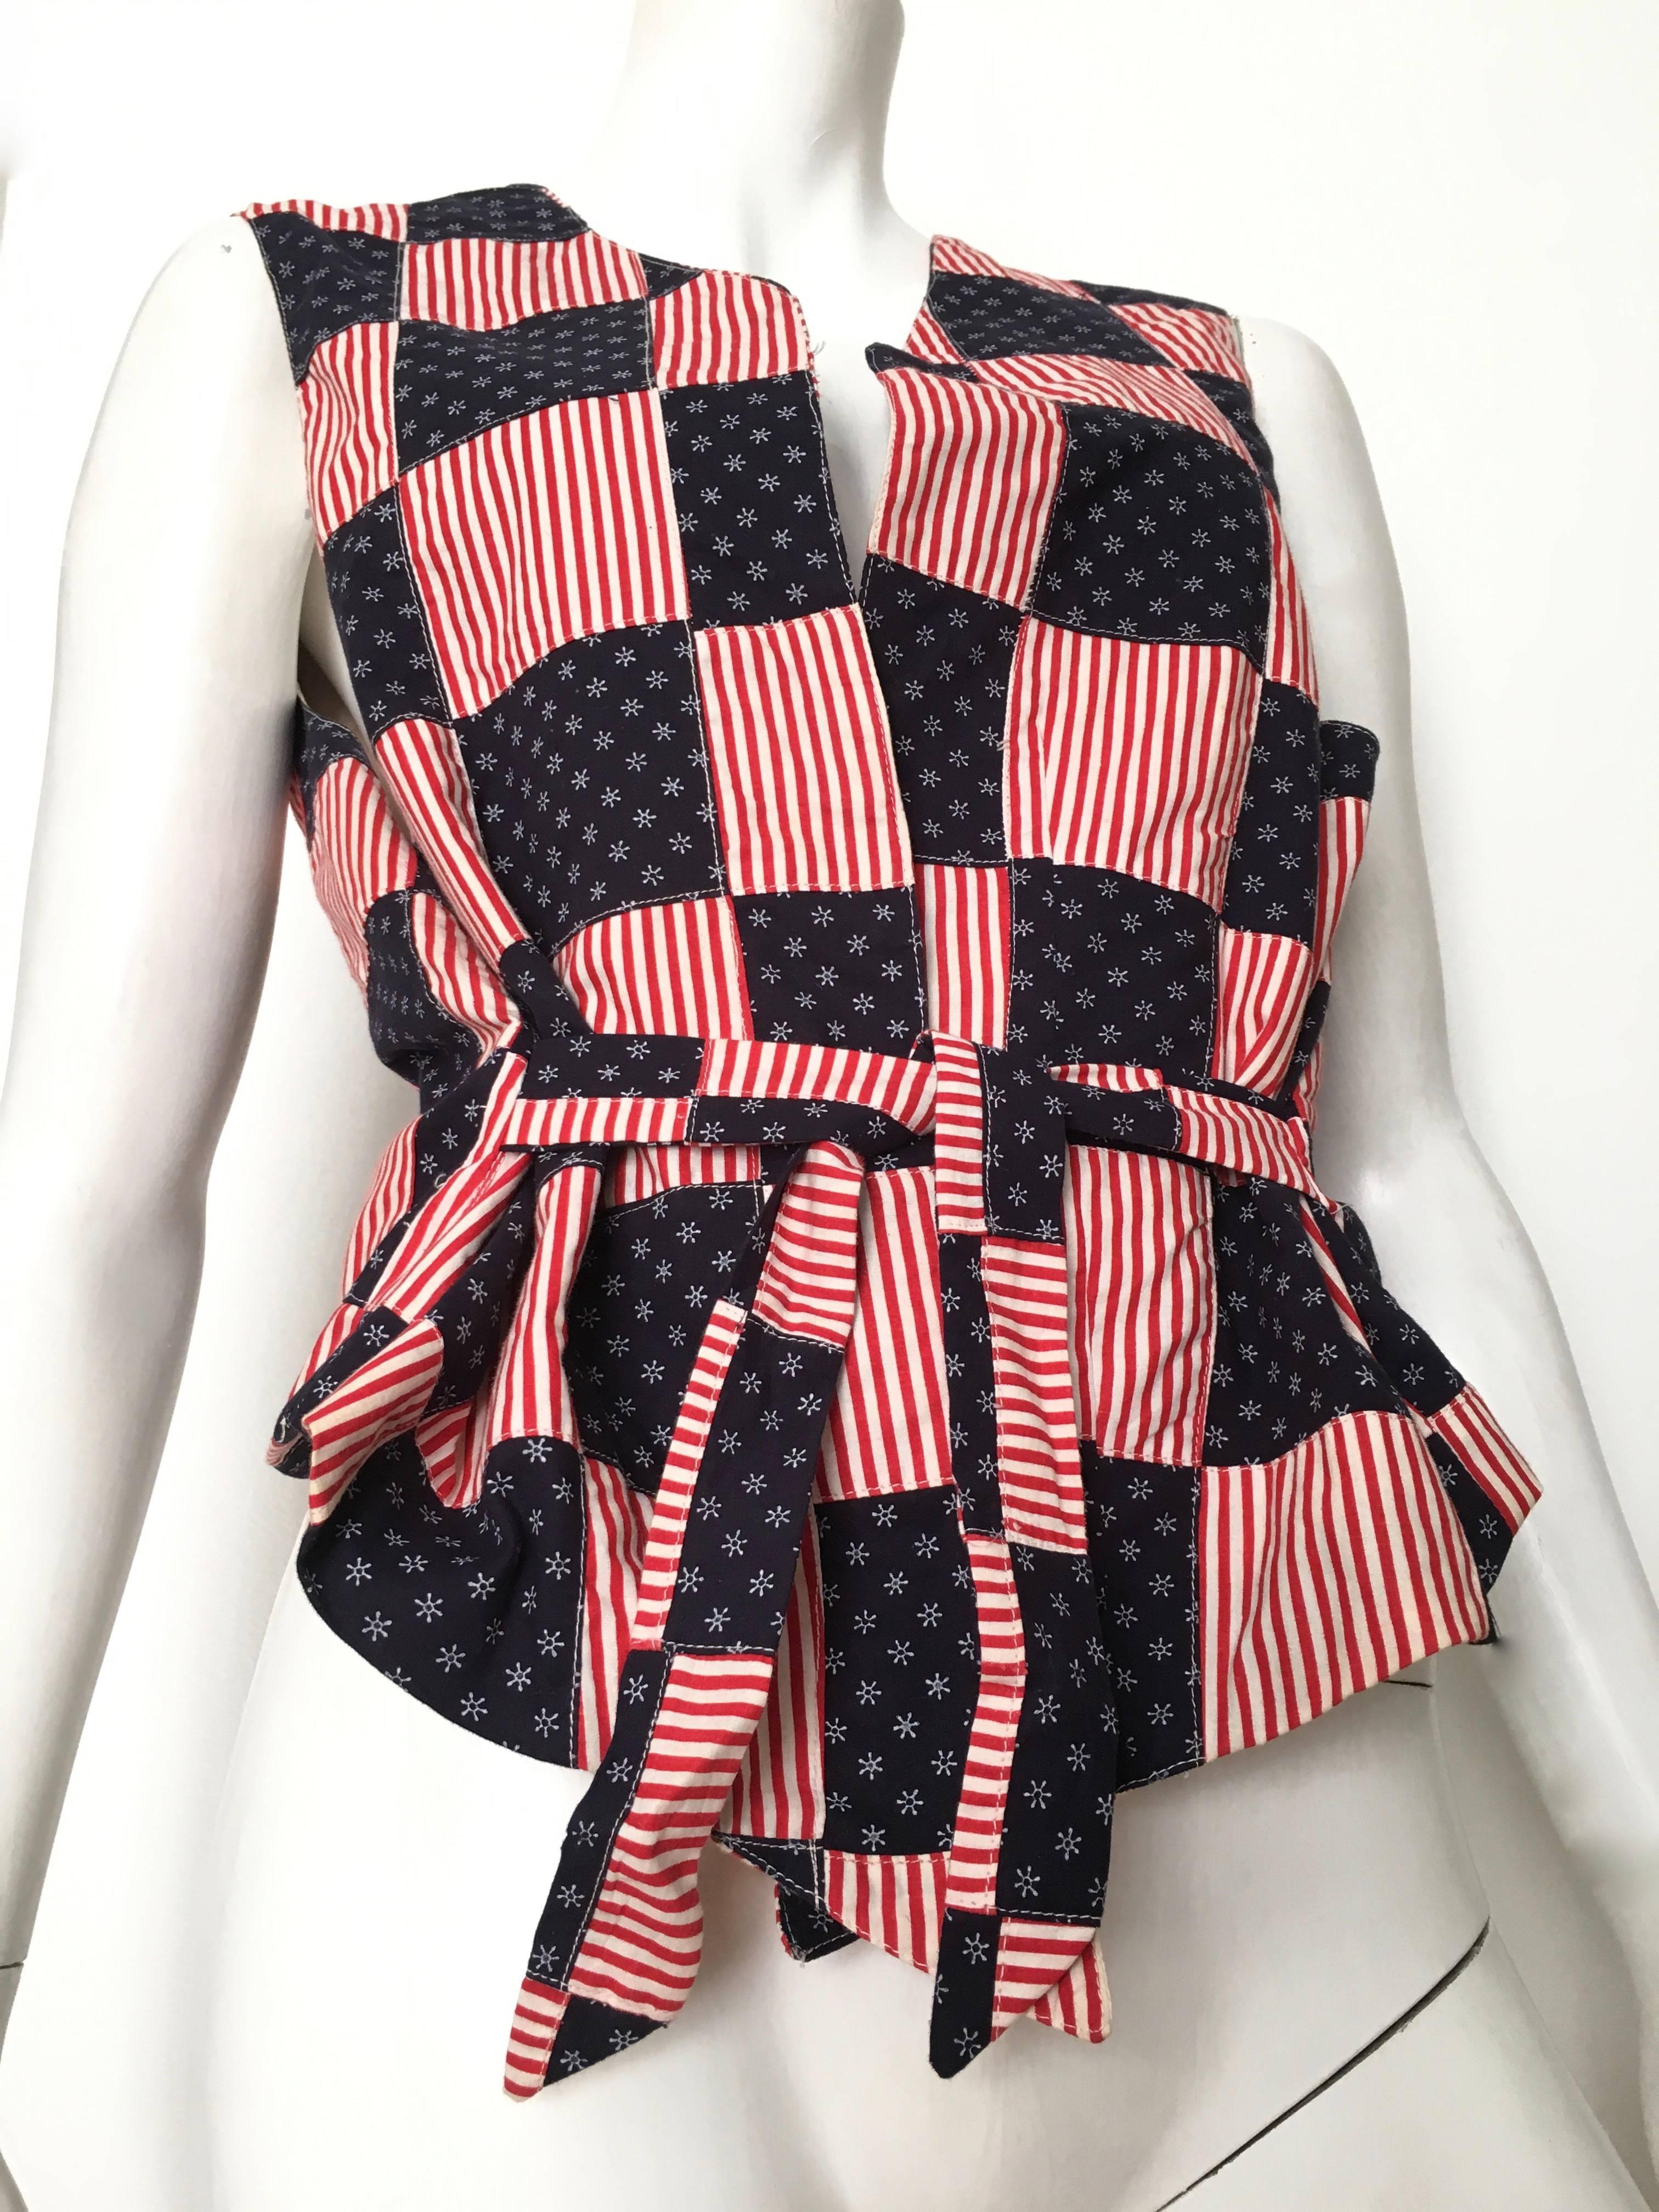 Dior Monsieur 1980s cotton red-white-blue patchwork vest is an ex-large size. I styled this Dior vest as a ladies item because I think a woman could rock this vest. Using the tie strings from the back, I showed how you could tie the strings in the